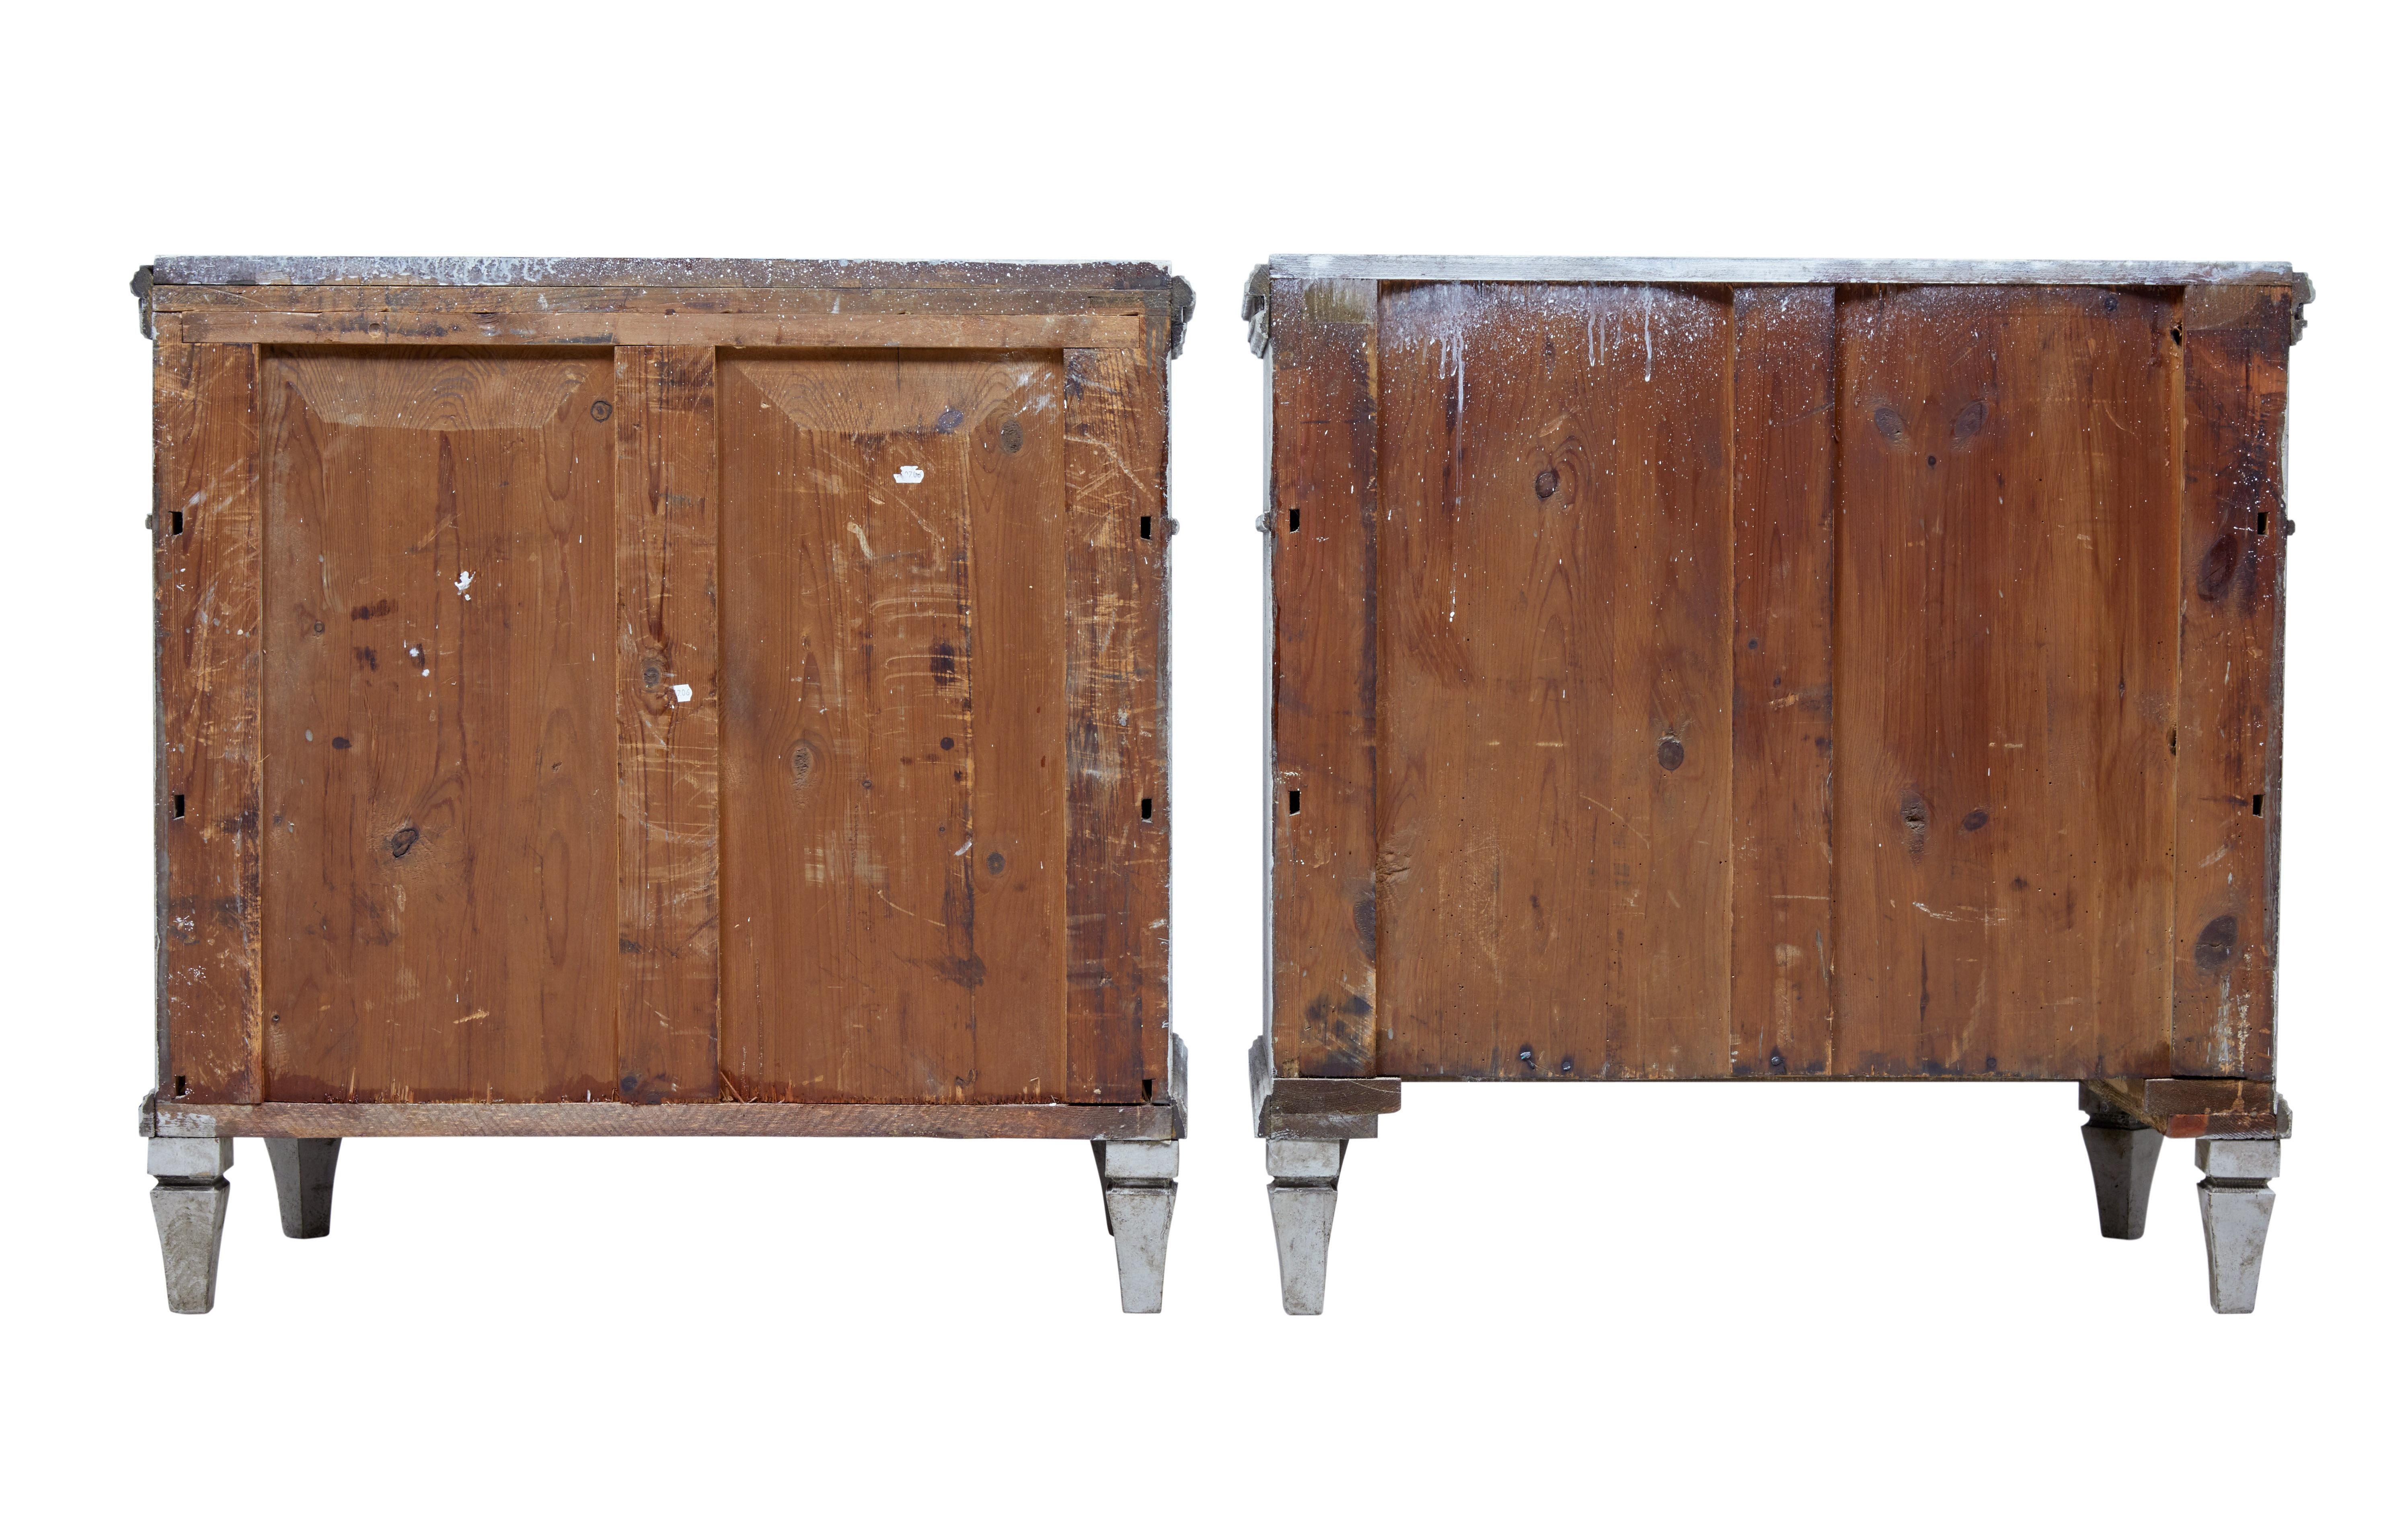 Hand-Painted Pair of 19th Century Scandinavian Commodes with Faux Marble Tops